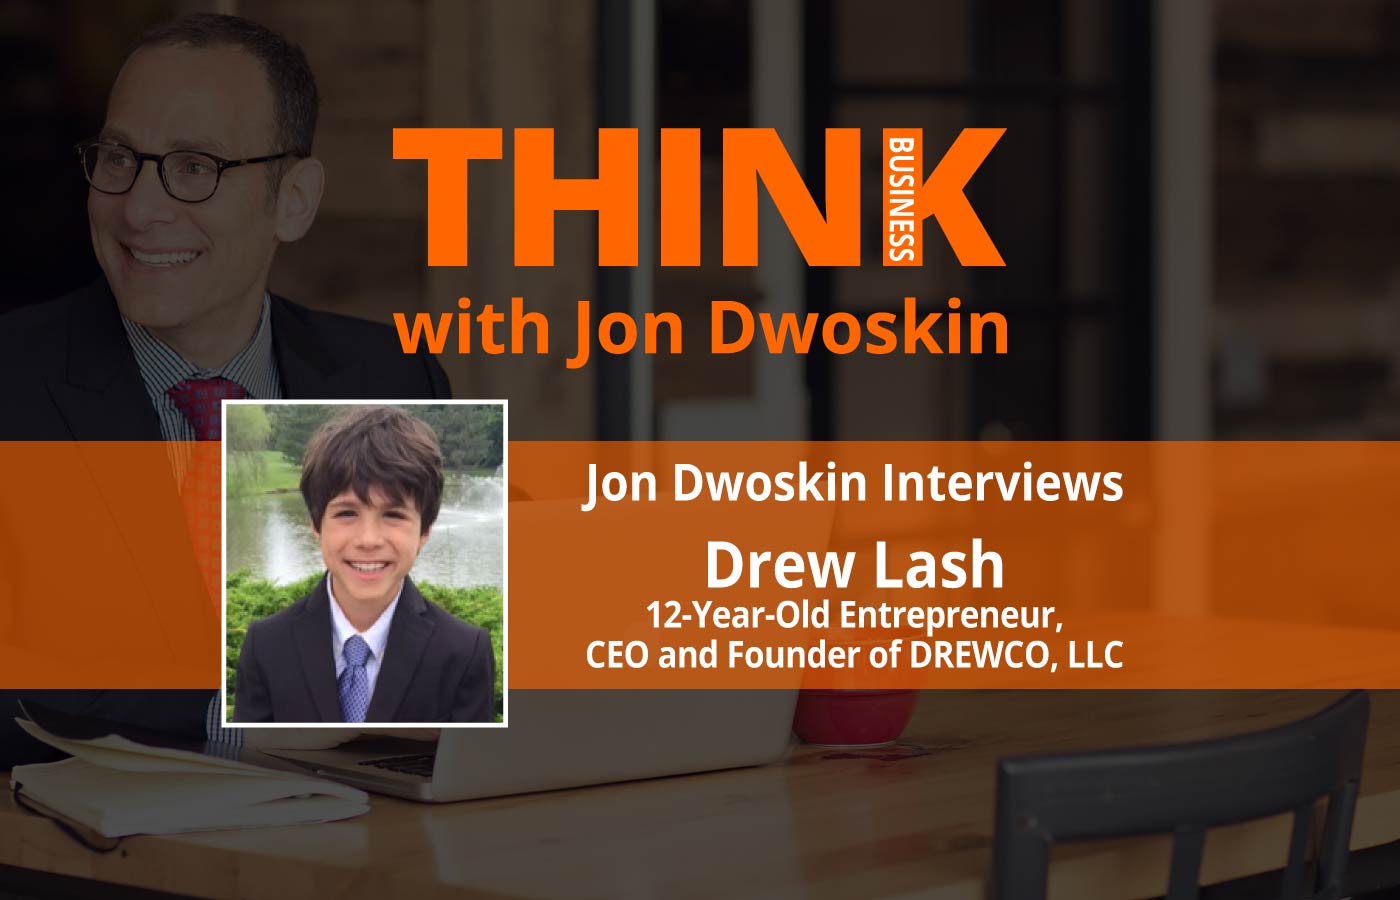 THINK Business: Jon Dwoskin Interviews Drew Lash, 12-Year-Old Entrepreneur, CEO and Founder of DREWco